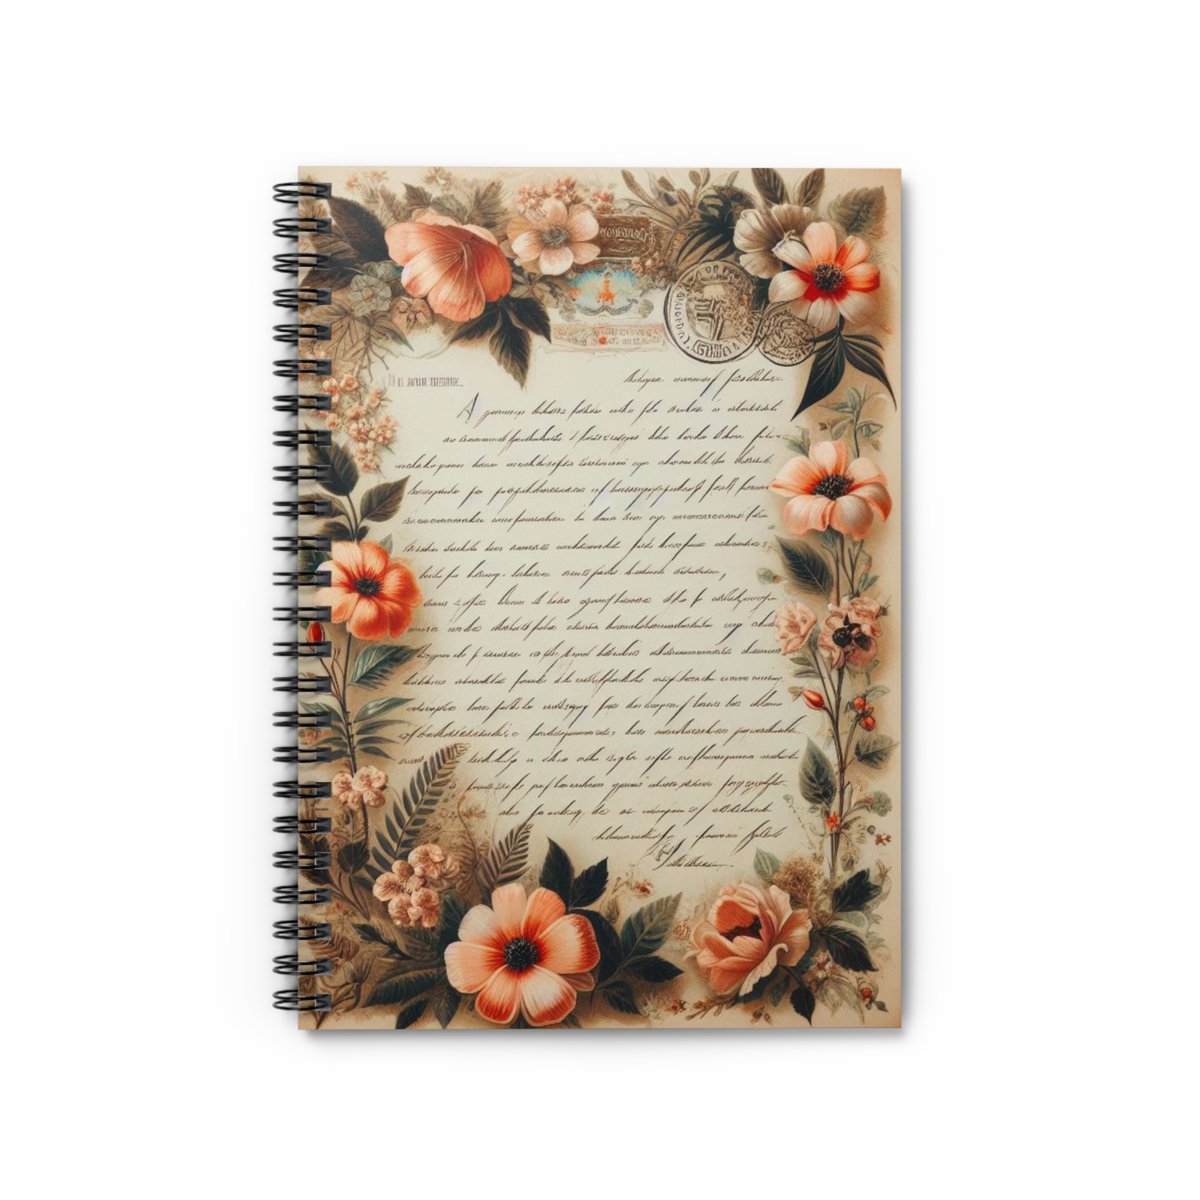 🌸Floral Ephemera Vintage Letter Spiral Notebook Shopping lists, school notes or poems - 118 page spiral notebook with ruled line paper is a perfect companion in everyday life.  #Notebook #spiralnotebook #Ephemera #vintagestyle #Floral #Flowers #vintage 
thistlemouse.co.uk/products/flora…